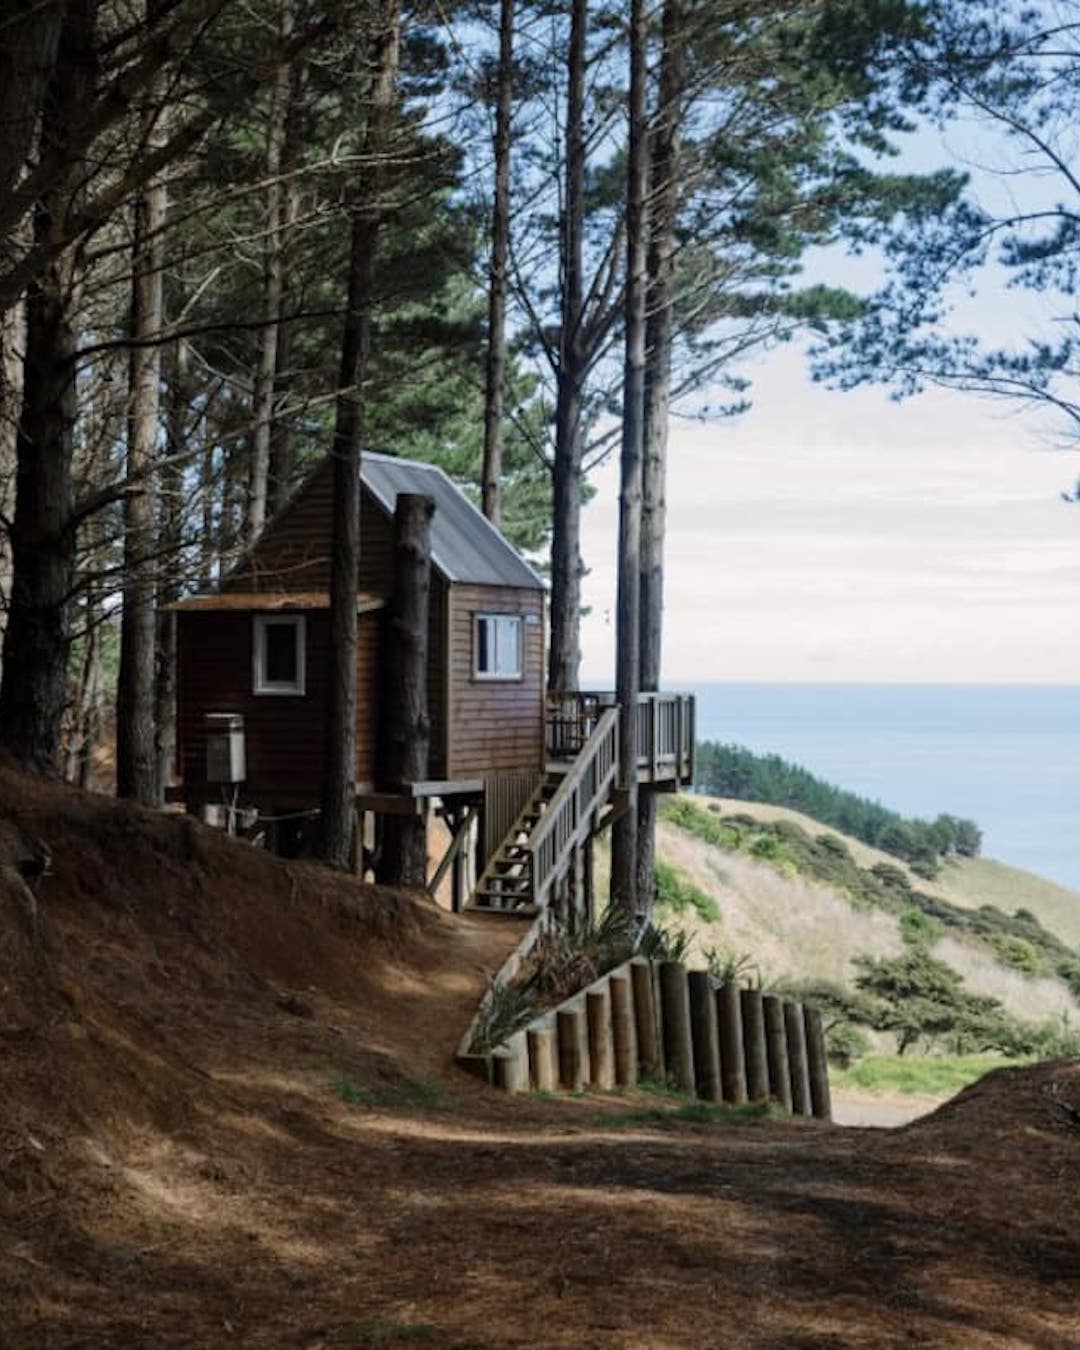 A treehouse-style wood cabin Airbnb in the New Zealand forest overlooking Whale Bay